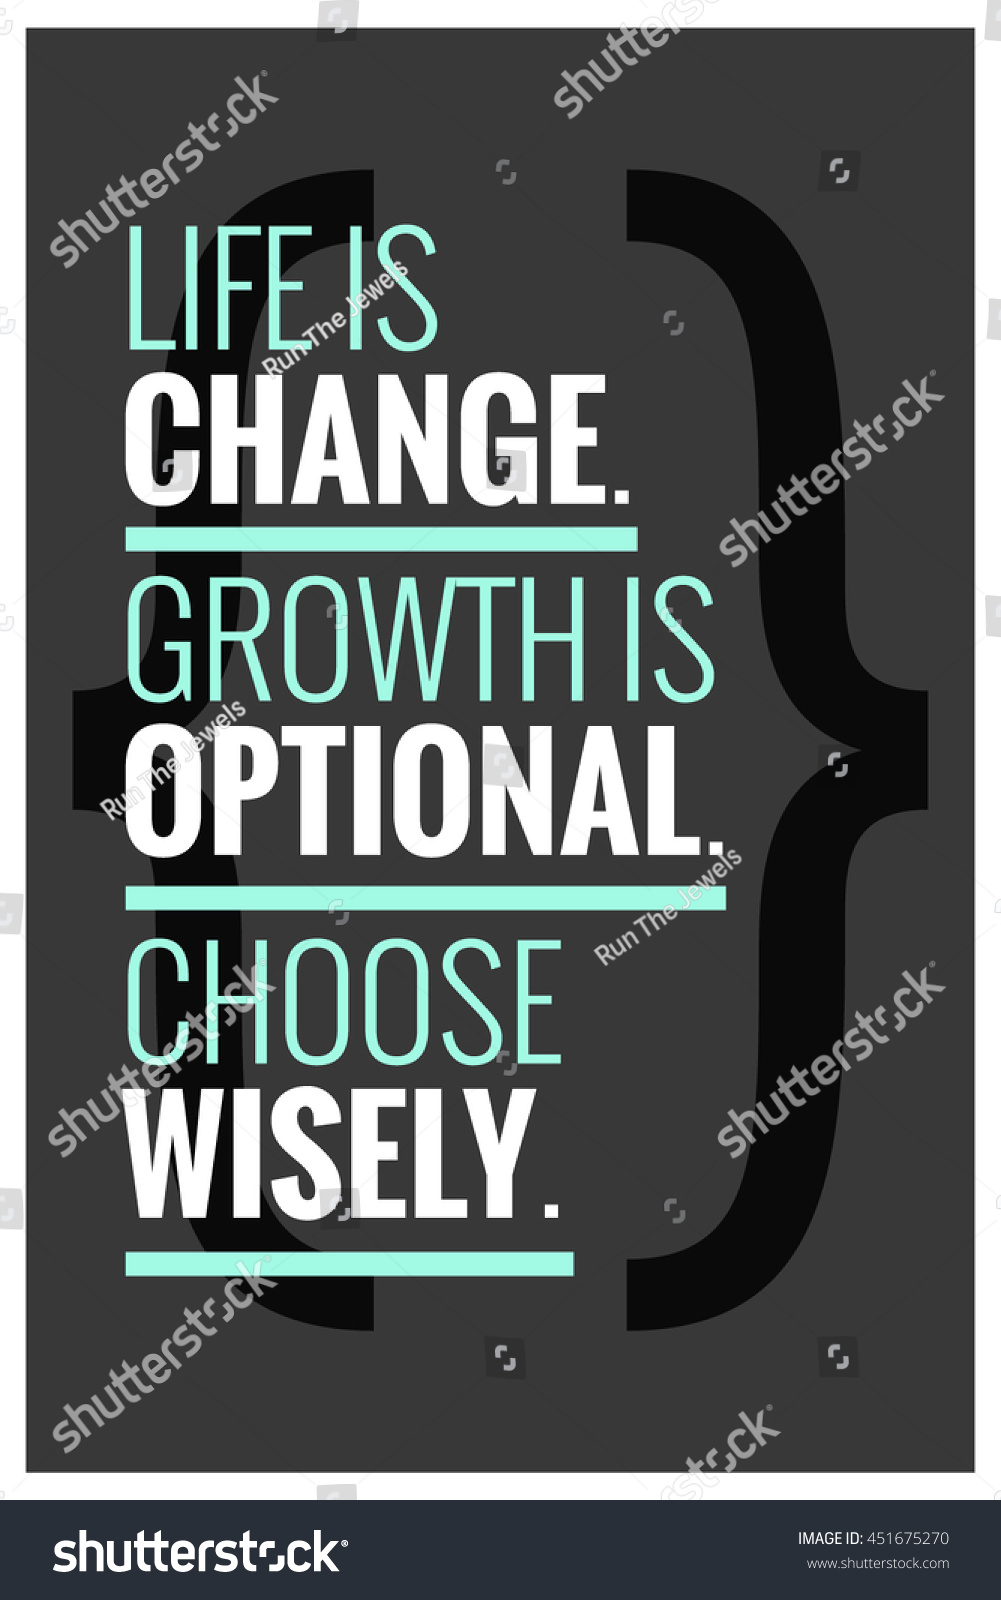 Life Change Growth Optional Choose Wisely Stock Vector Royalty Free 451675270